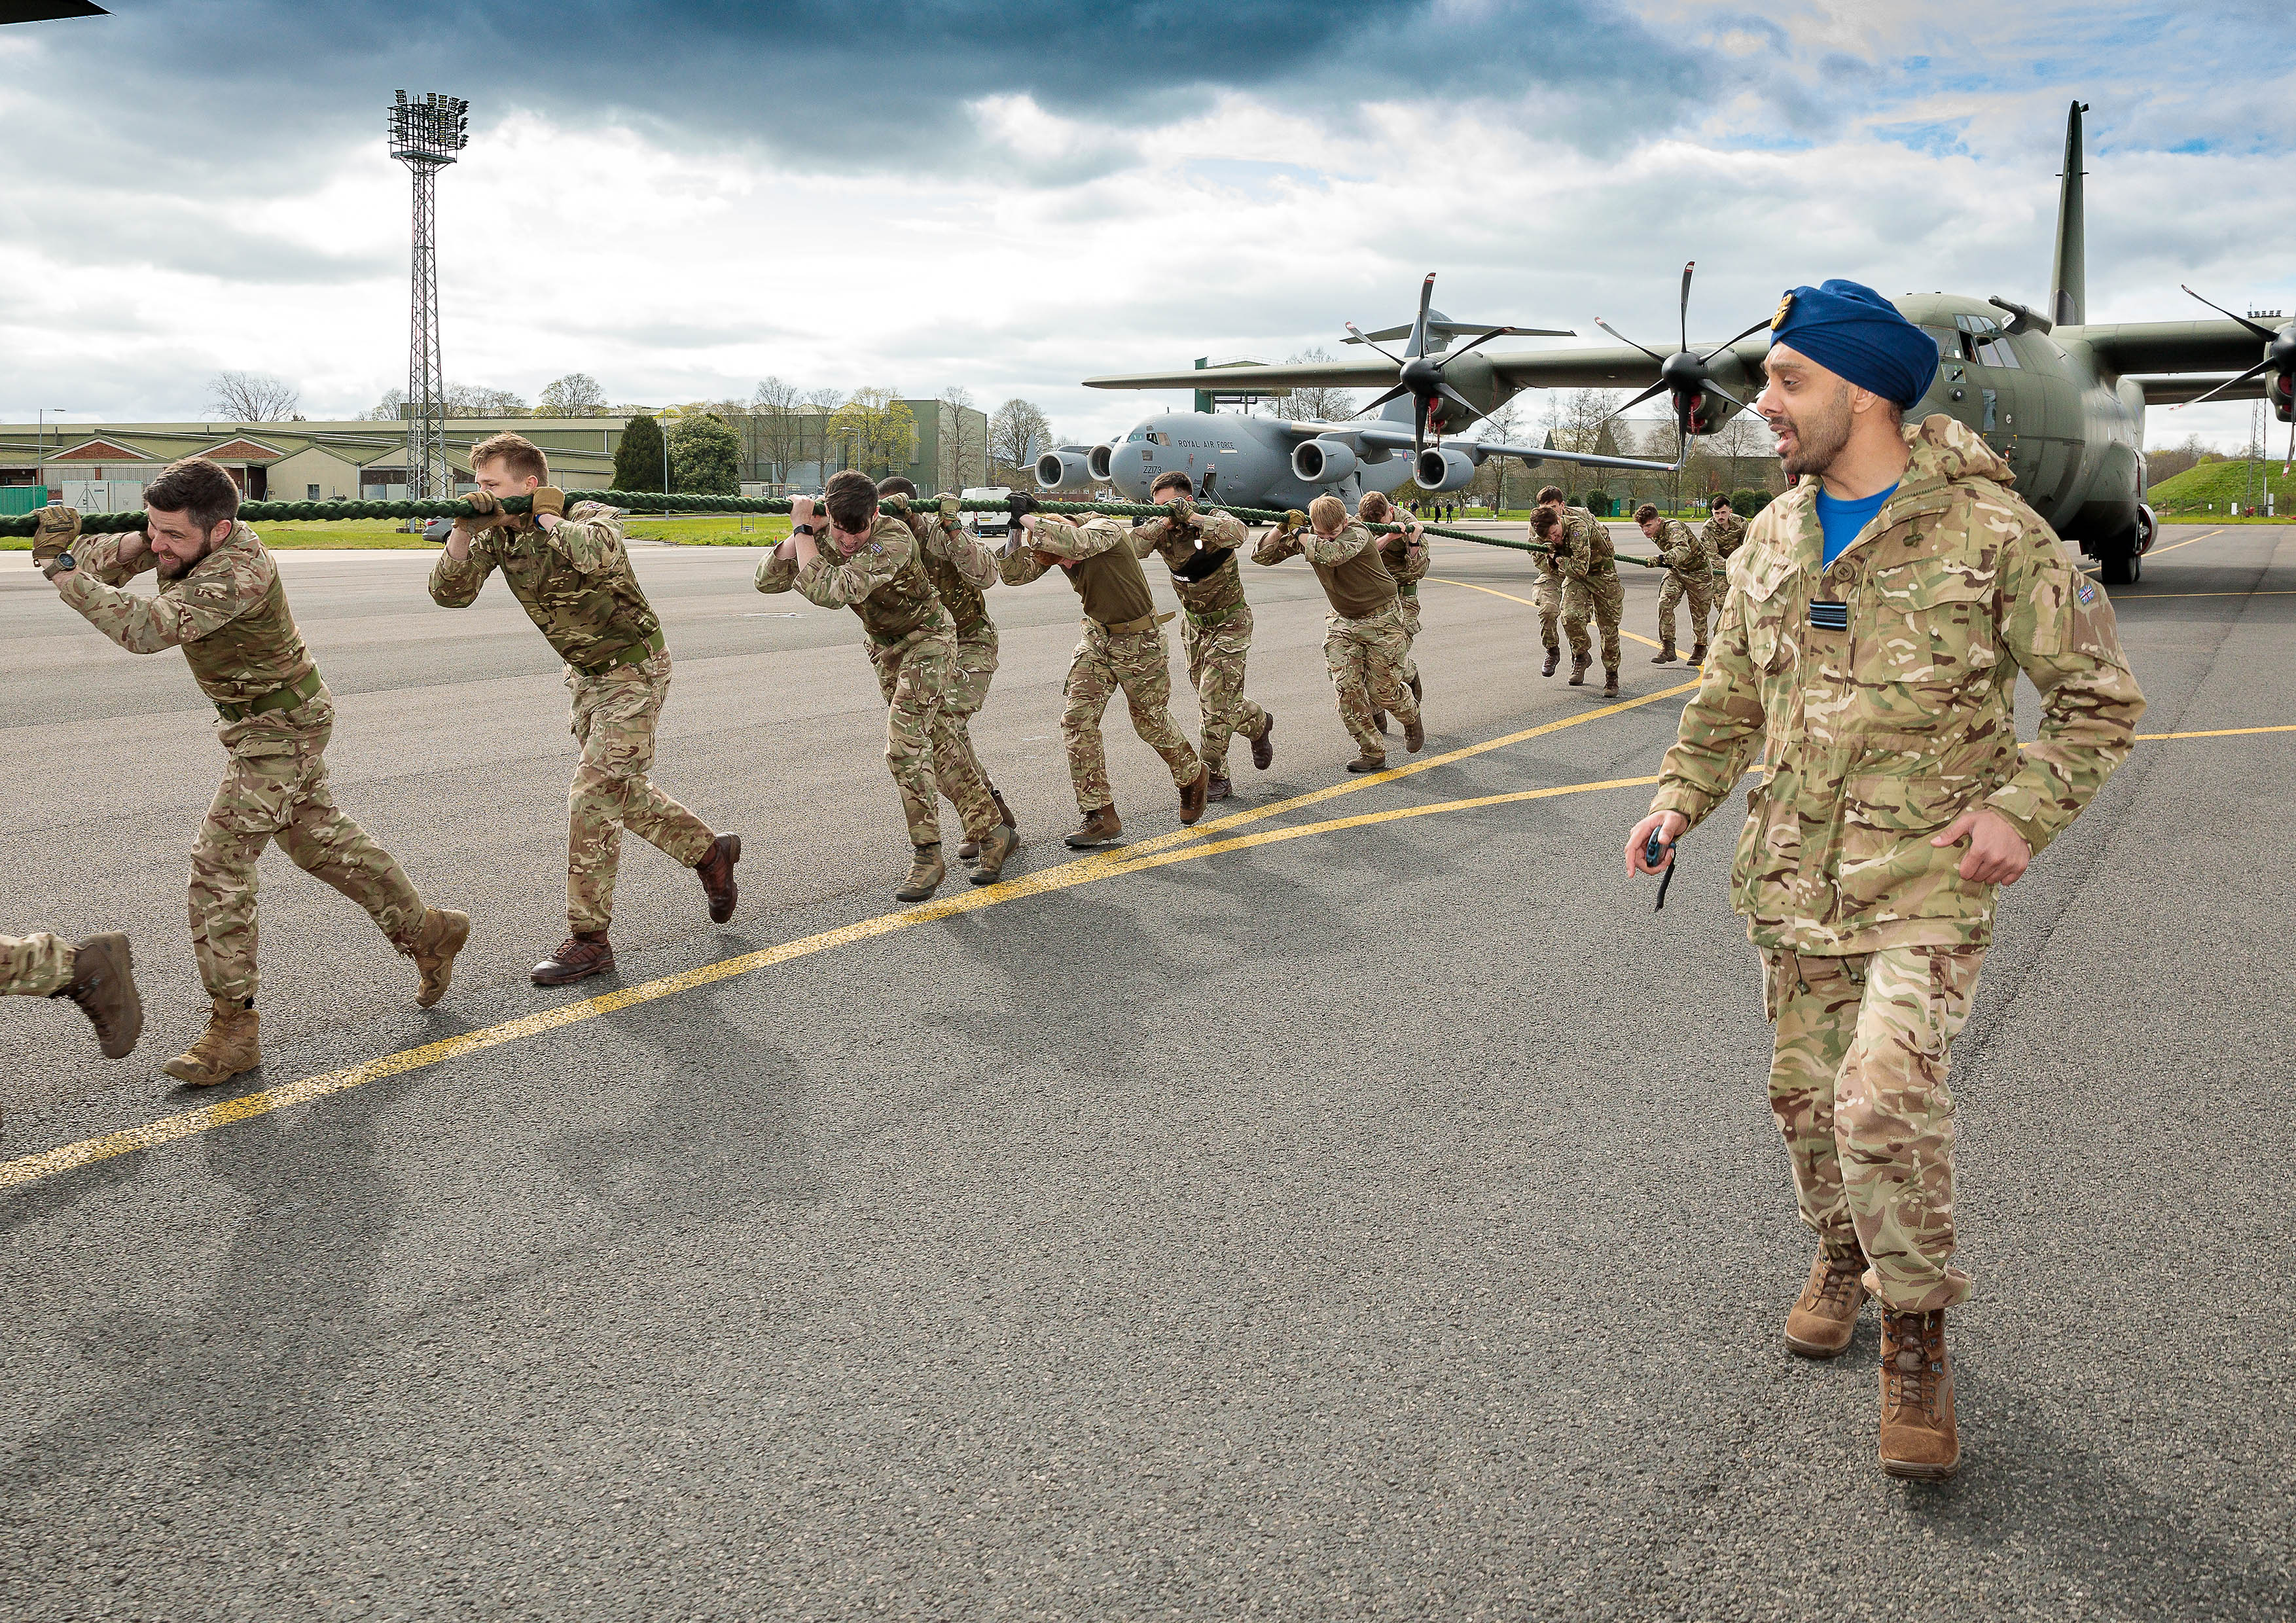 The Hercules Charity Pull took place at RAF Brize Norton on 5 Apr 22, raising money for two extremely deserving charities.